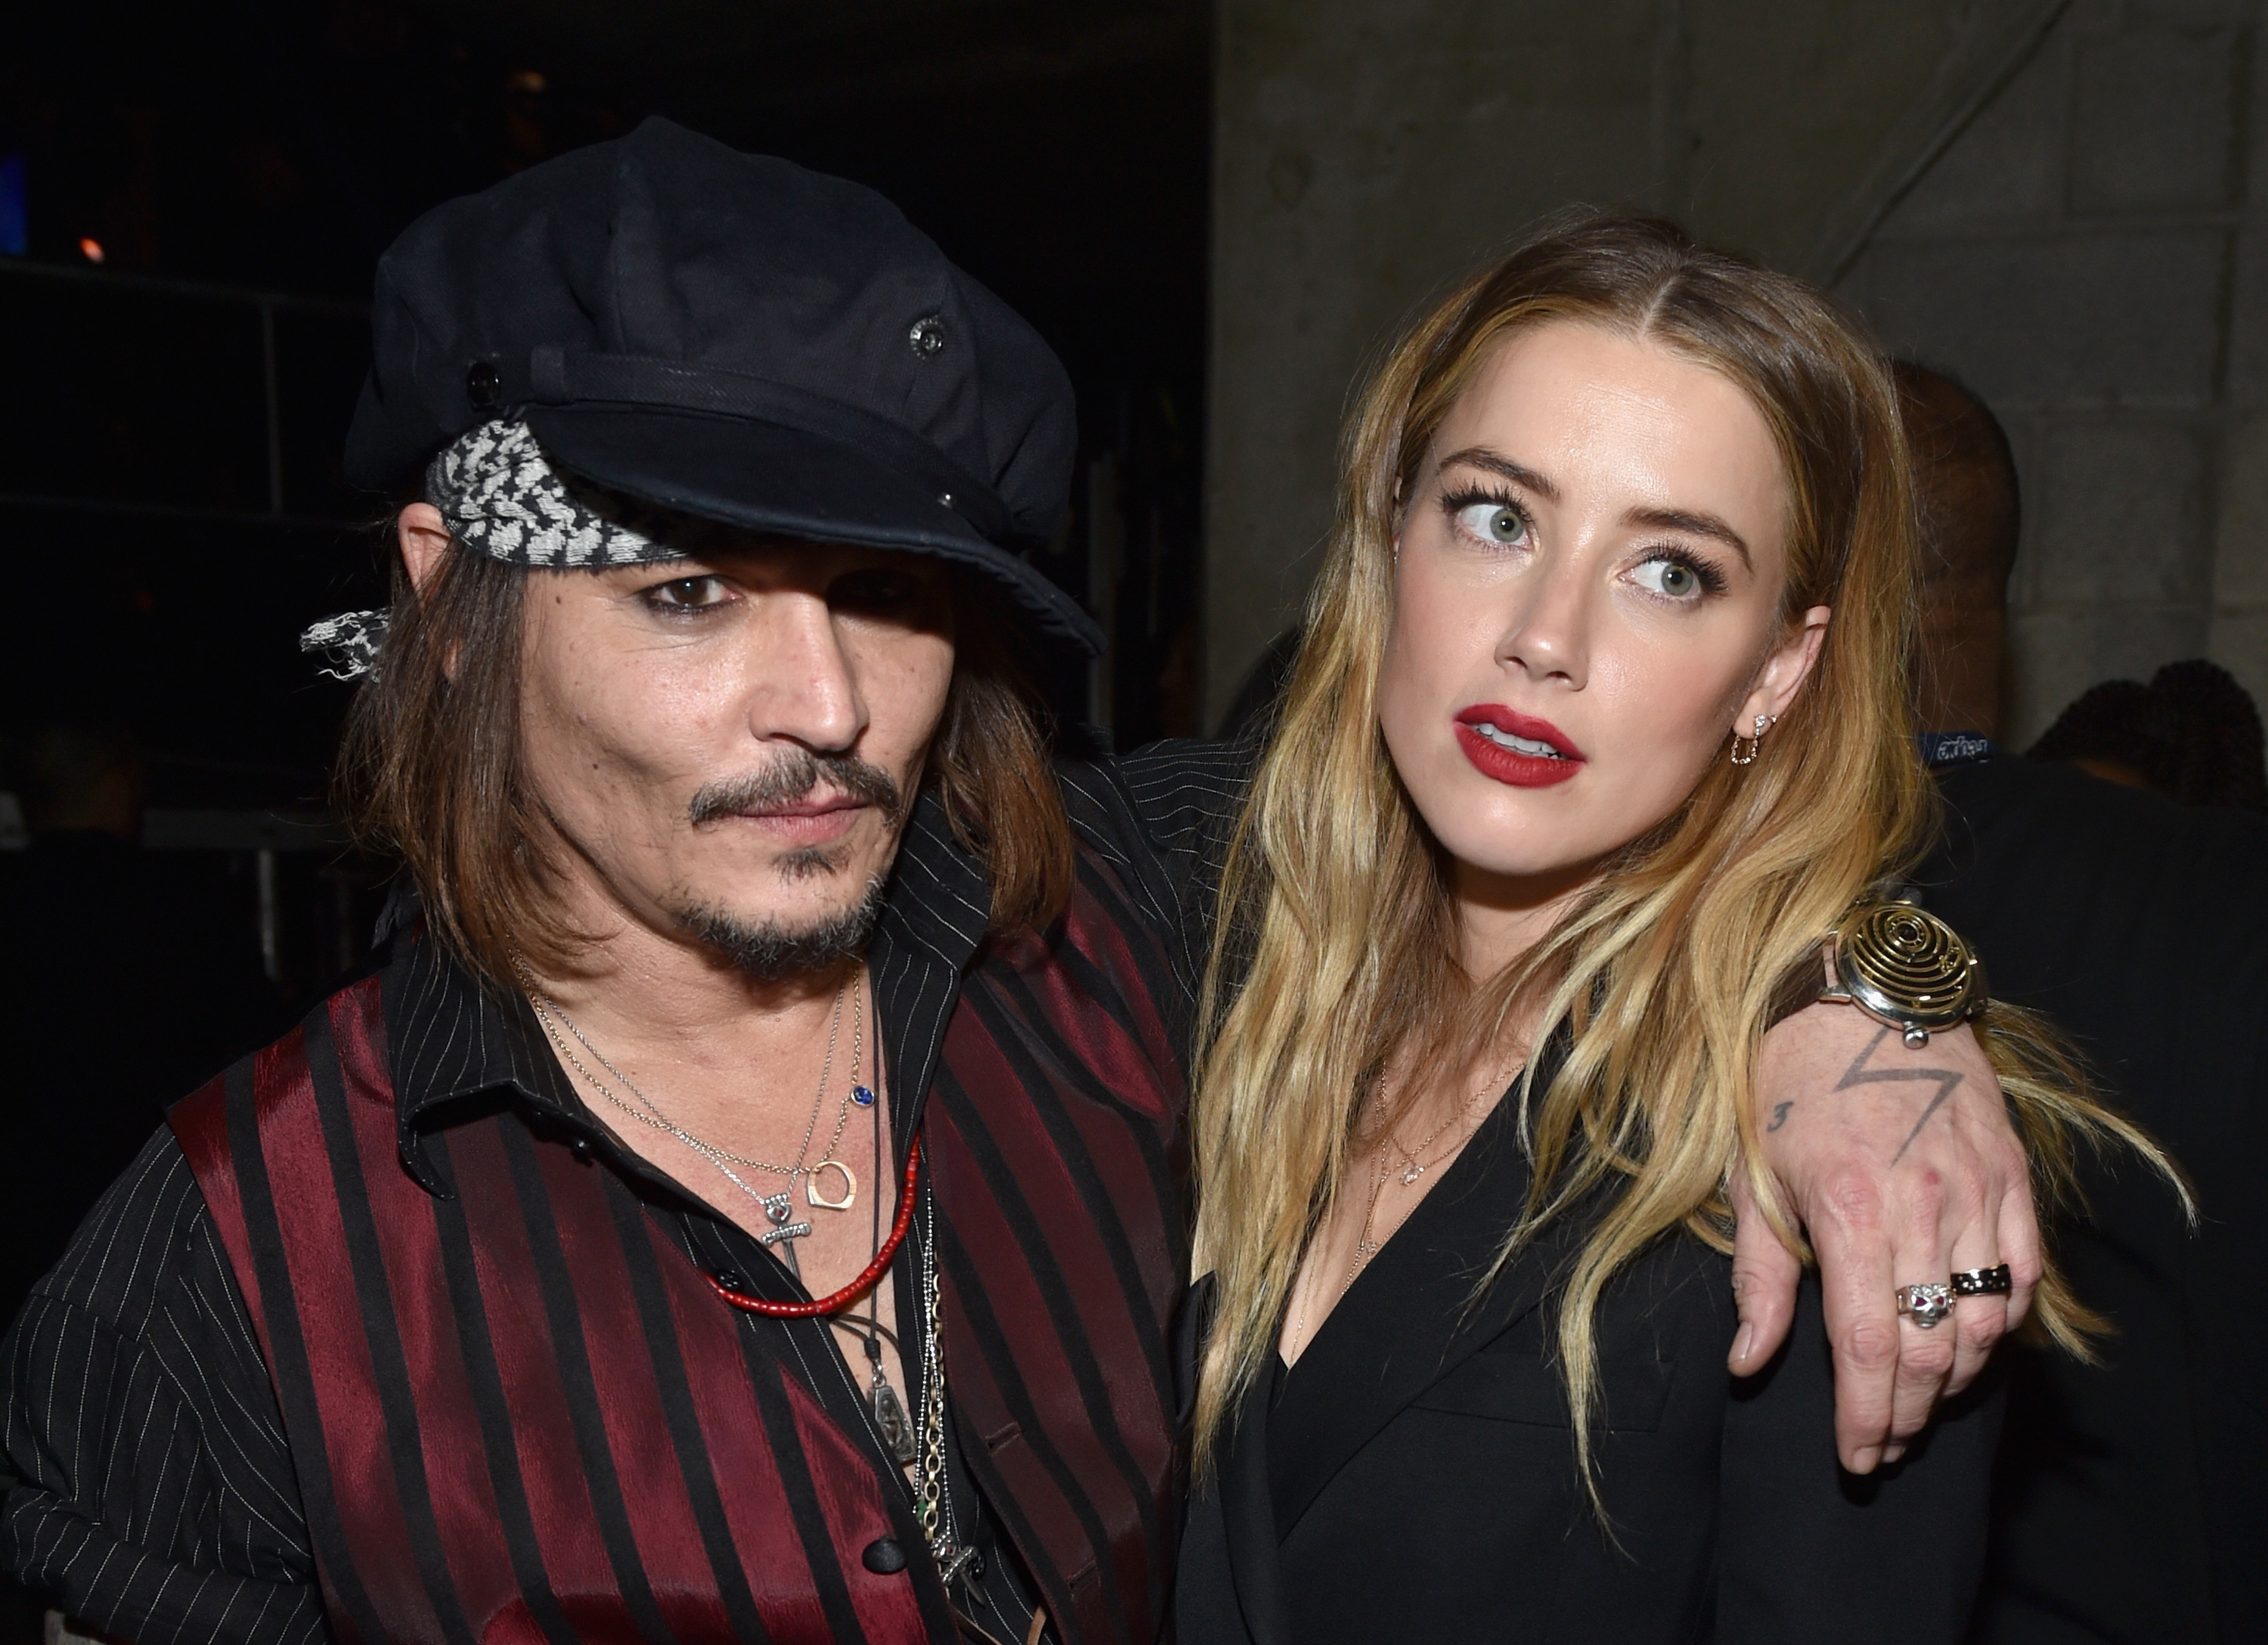 Actor/musician Johnny Depp (L) and actress Amber Heard attend The 58th GRAMMY Awards at Staples Center on February 15, 2016 in Los Angeles, California.  (John Shearer--WireImage) (John Shearer&mdash;WireImage)